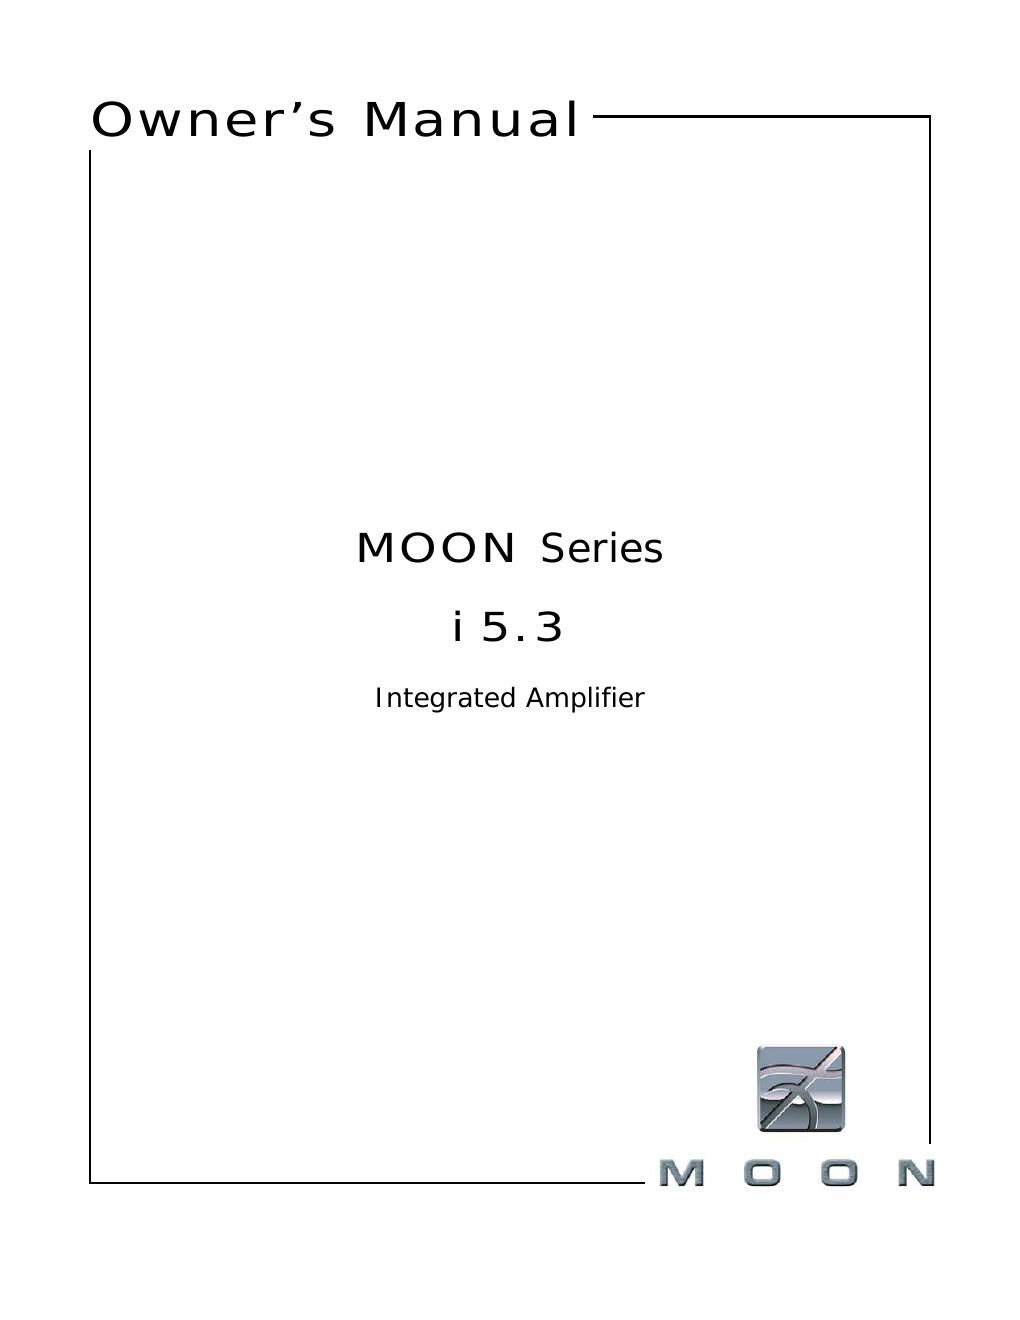 moon i 5 3 owners manual